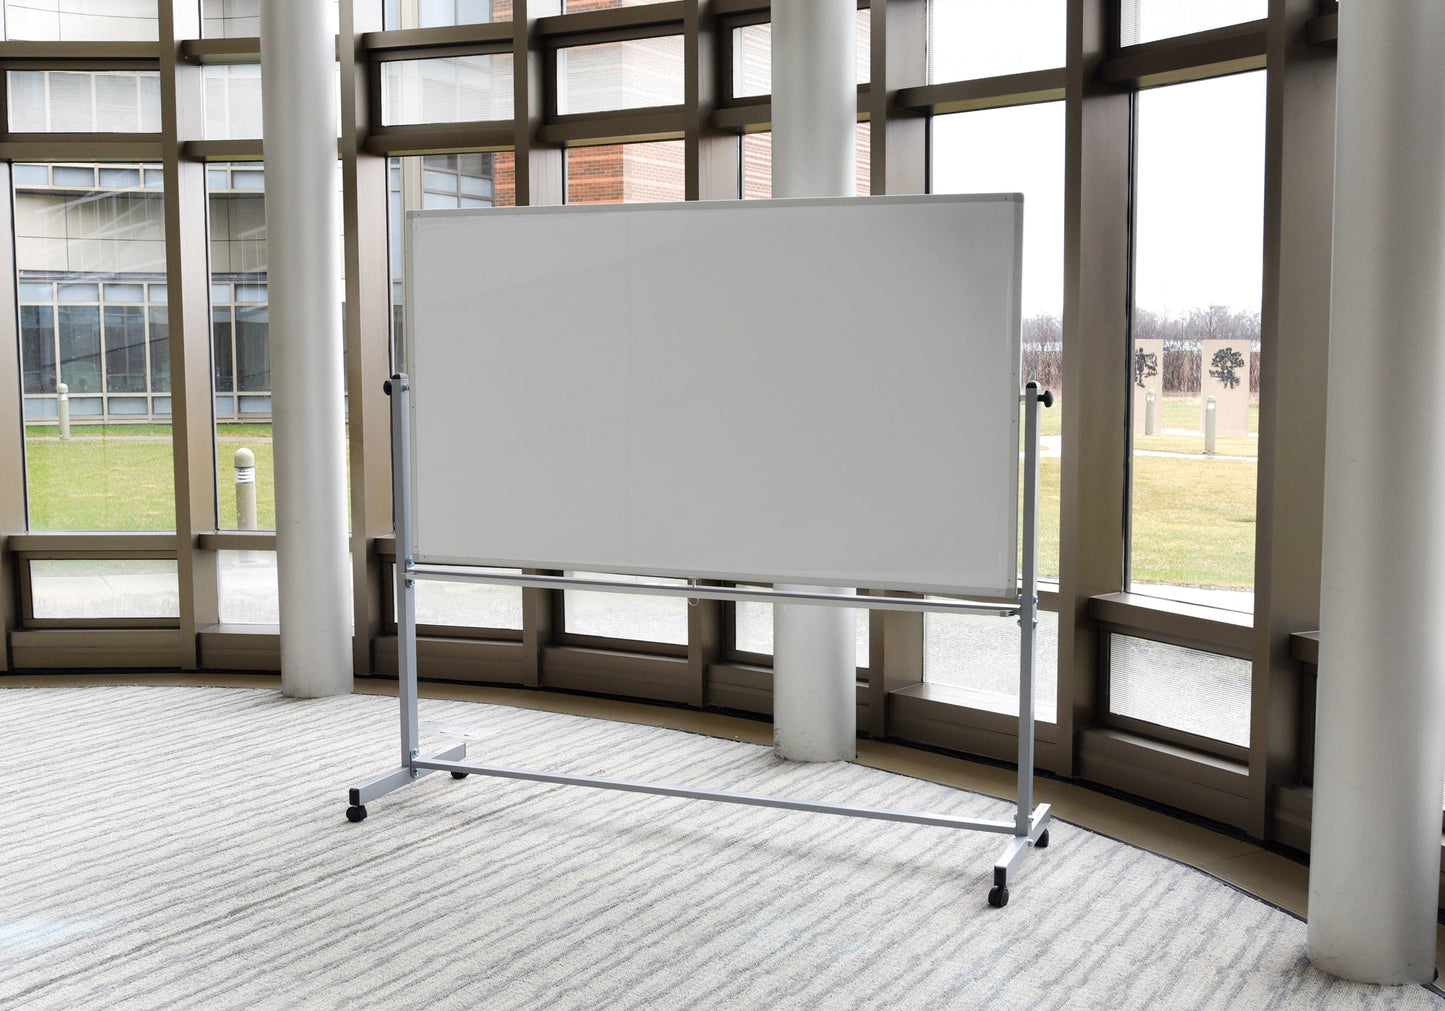 72"W x 48"H Mobile Whiteboard - Double-sided Magnetic dry erase markerboard - Luxor MB7248WW - SchoolOutlet